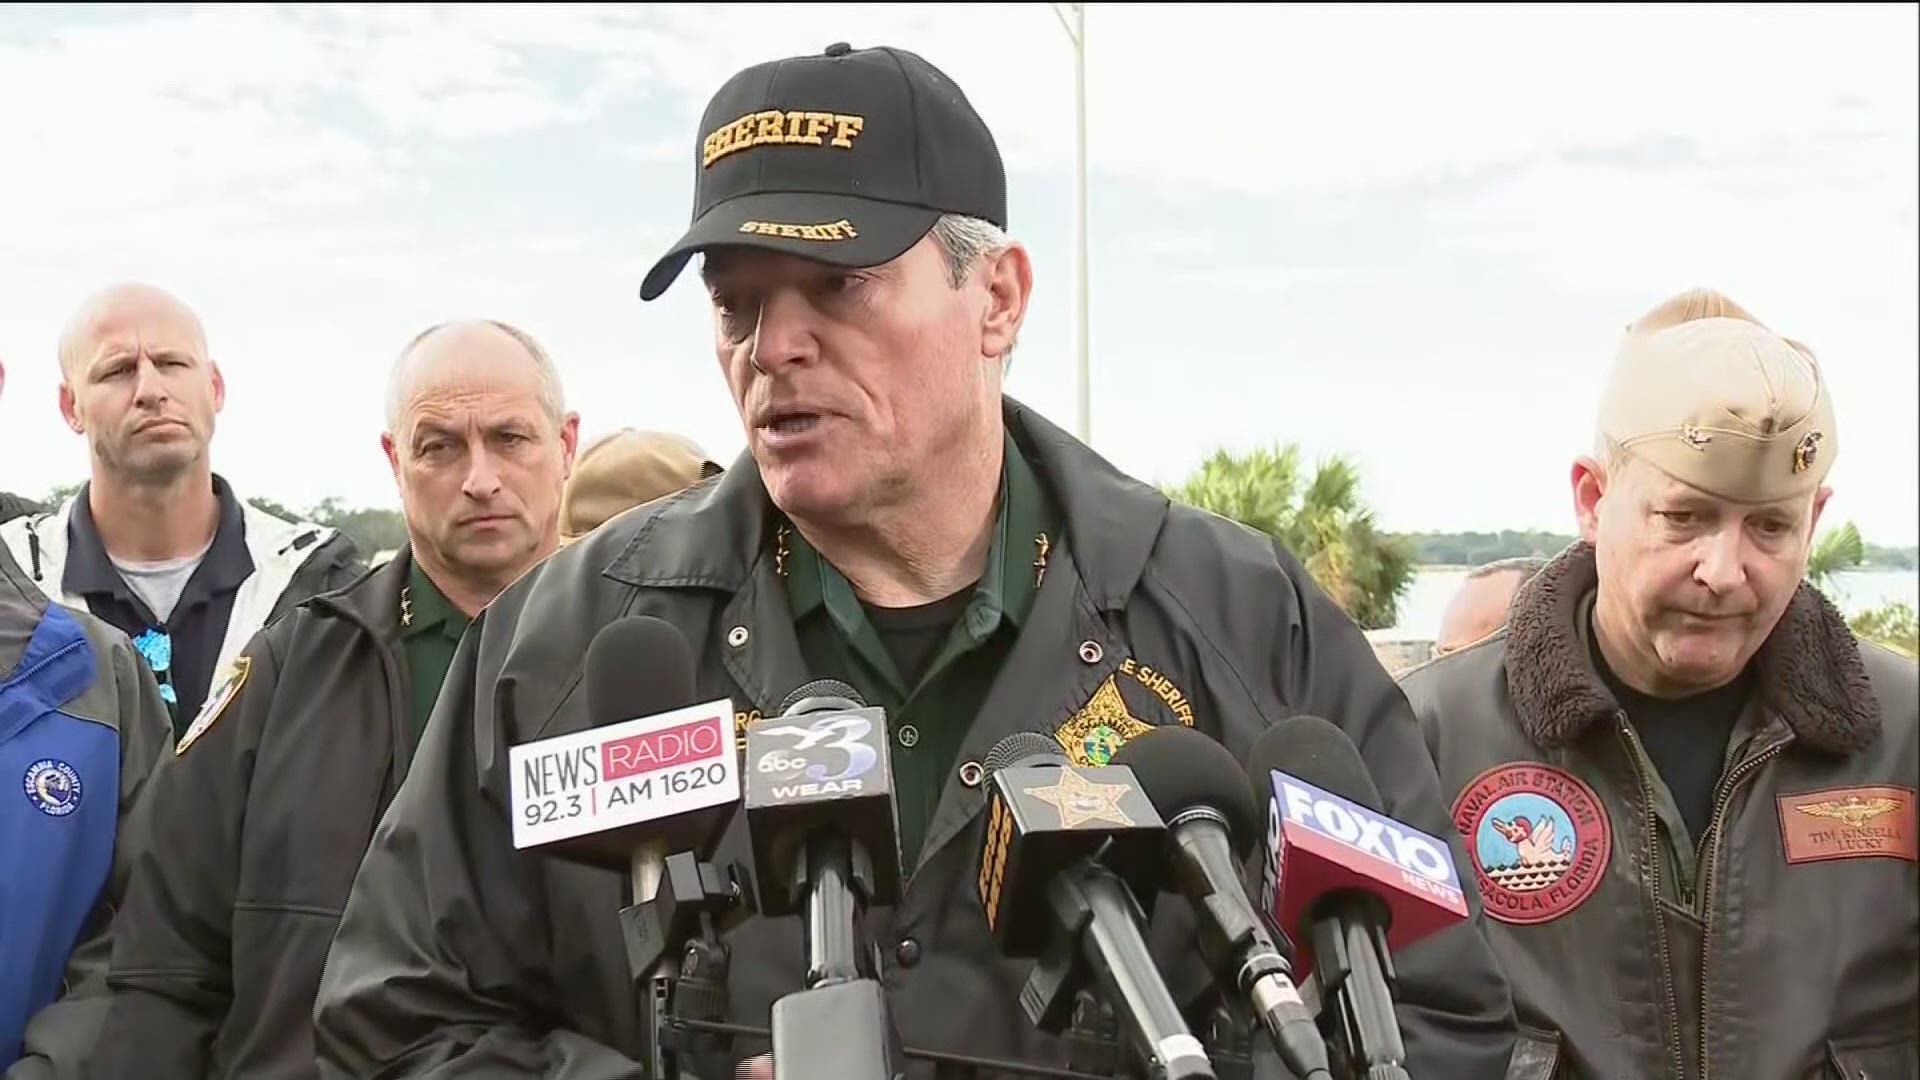 Escambia County Sheriff David Morgan said two deputies who engaged the shooter were shot. One of the deputies shot and killed the shooter.